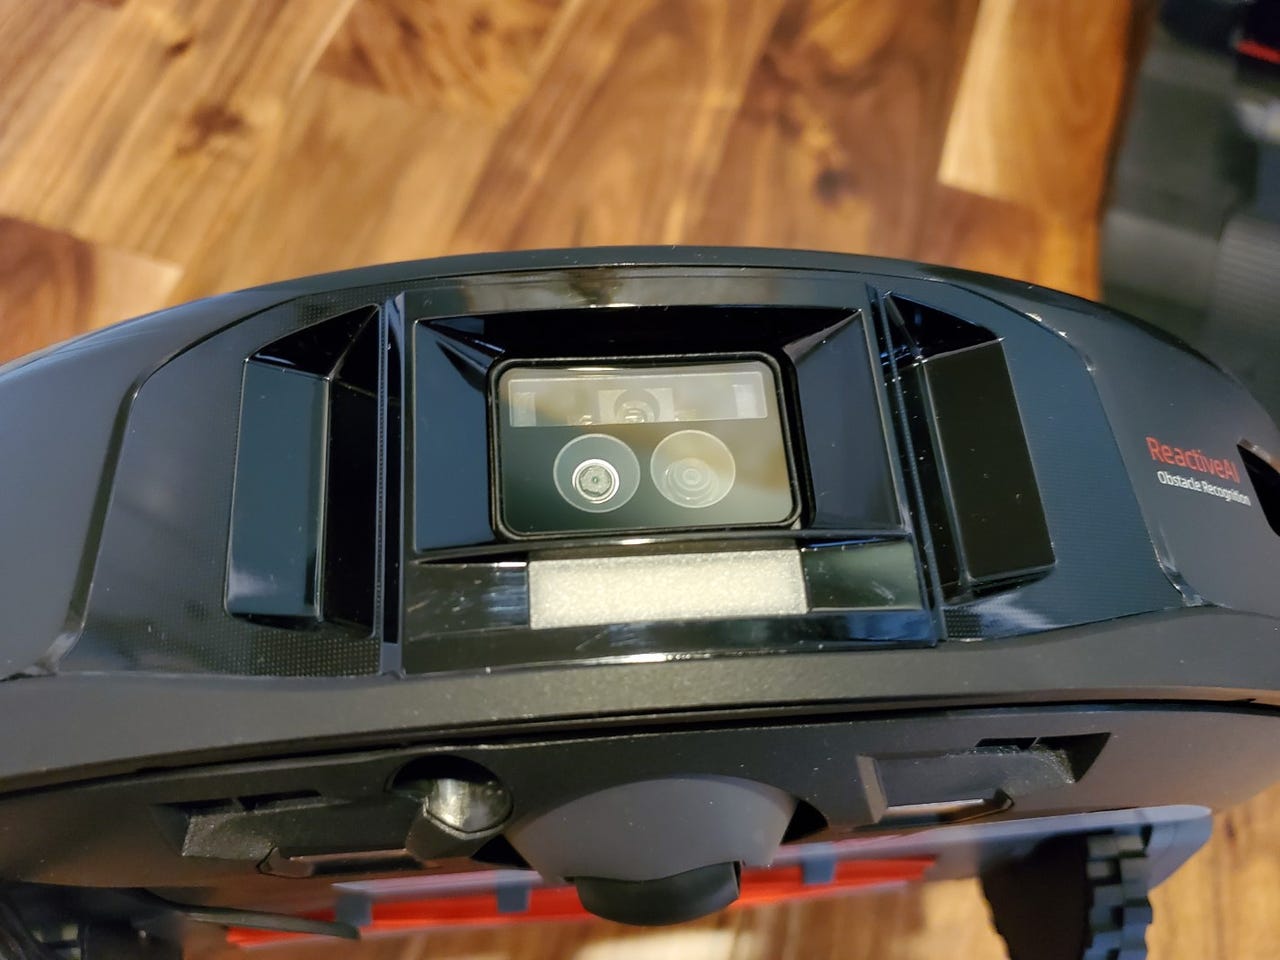 Roborock S7 MaxV Ultra review: Most trustworthy robot vacuum and